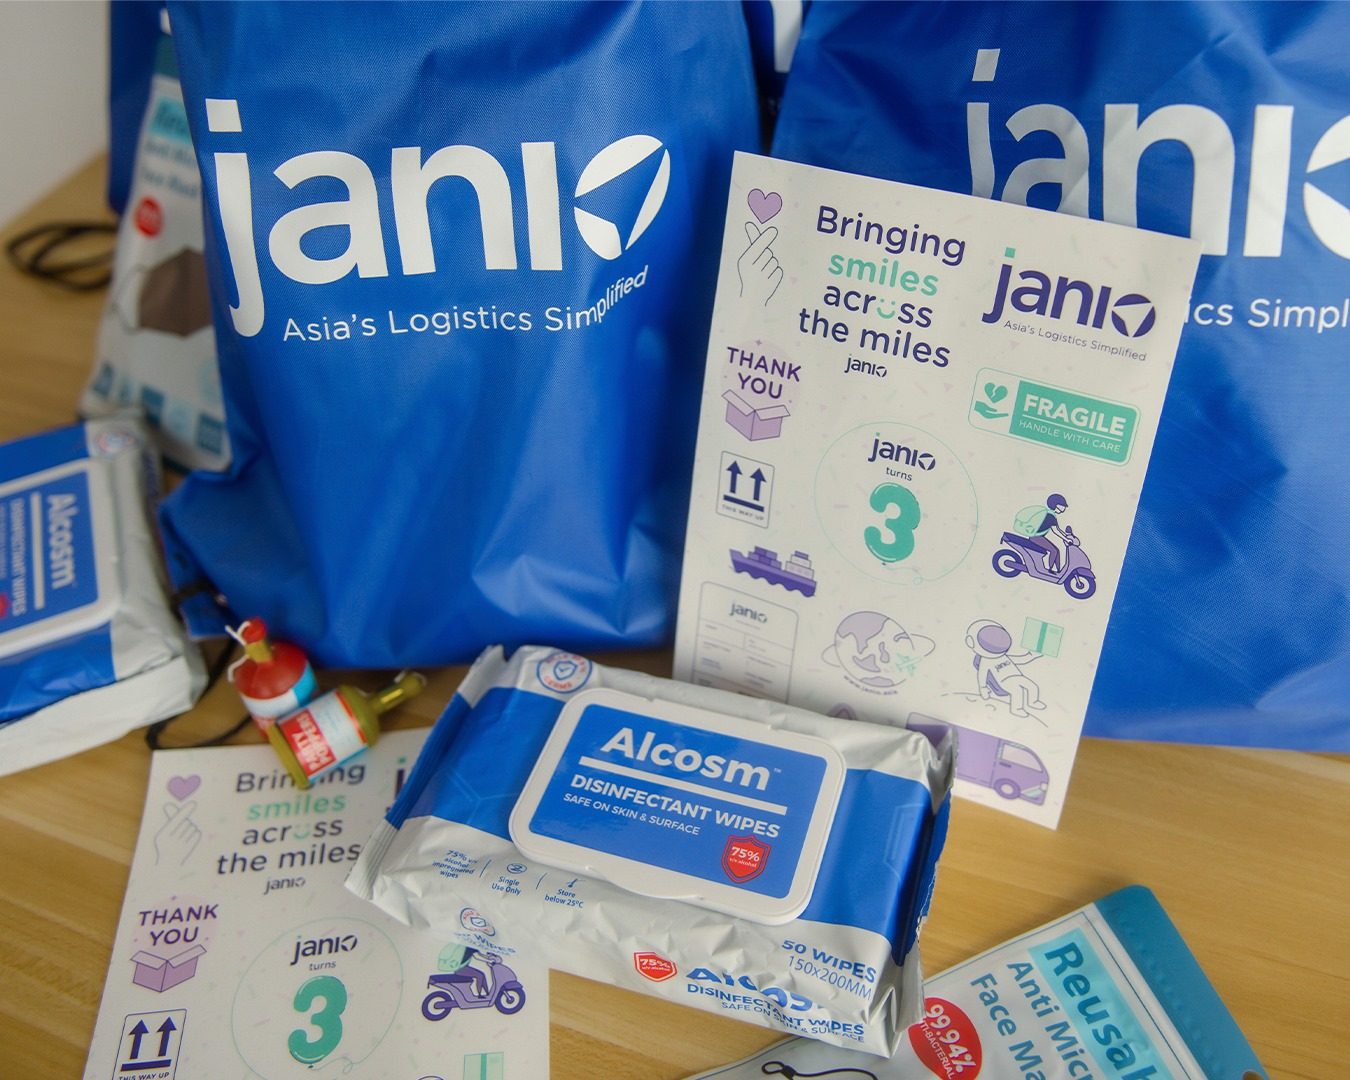 SG-based logistics startup Janio raises $8m from fintech firm Choco Up